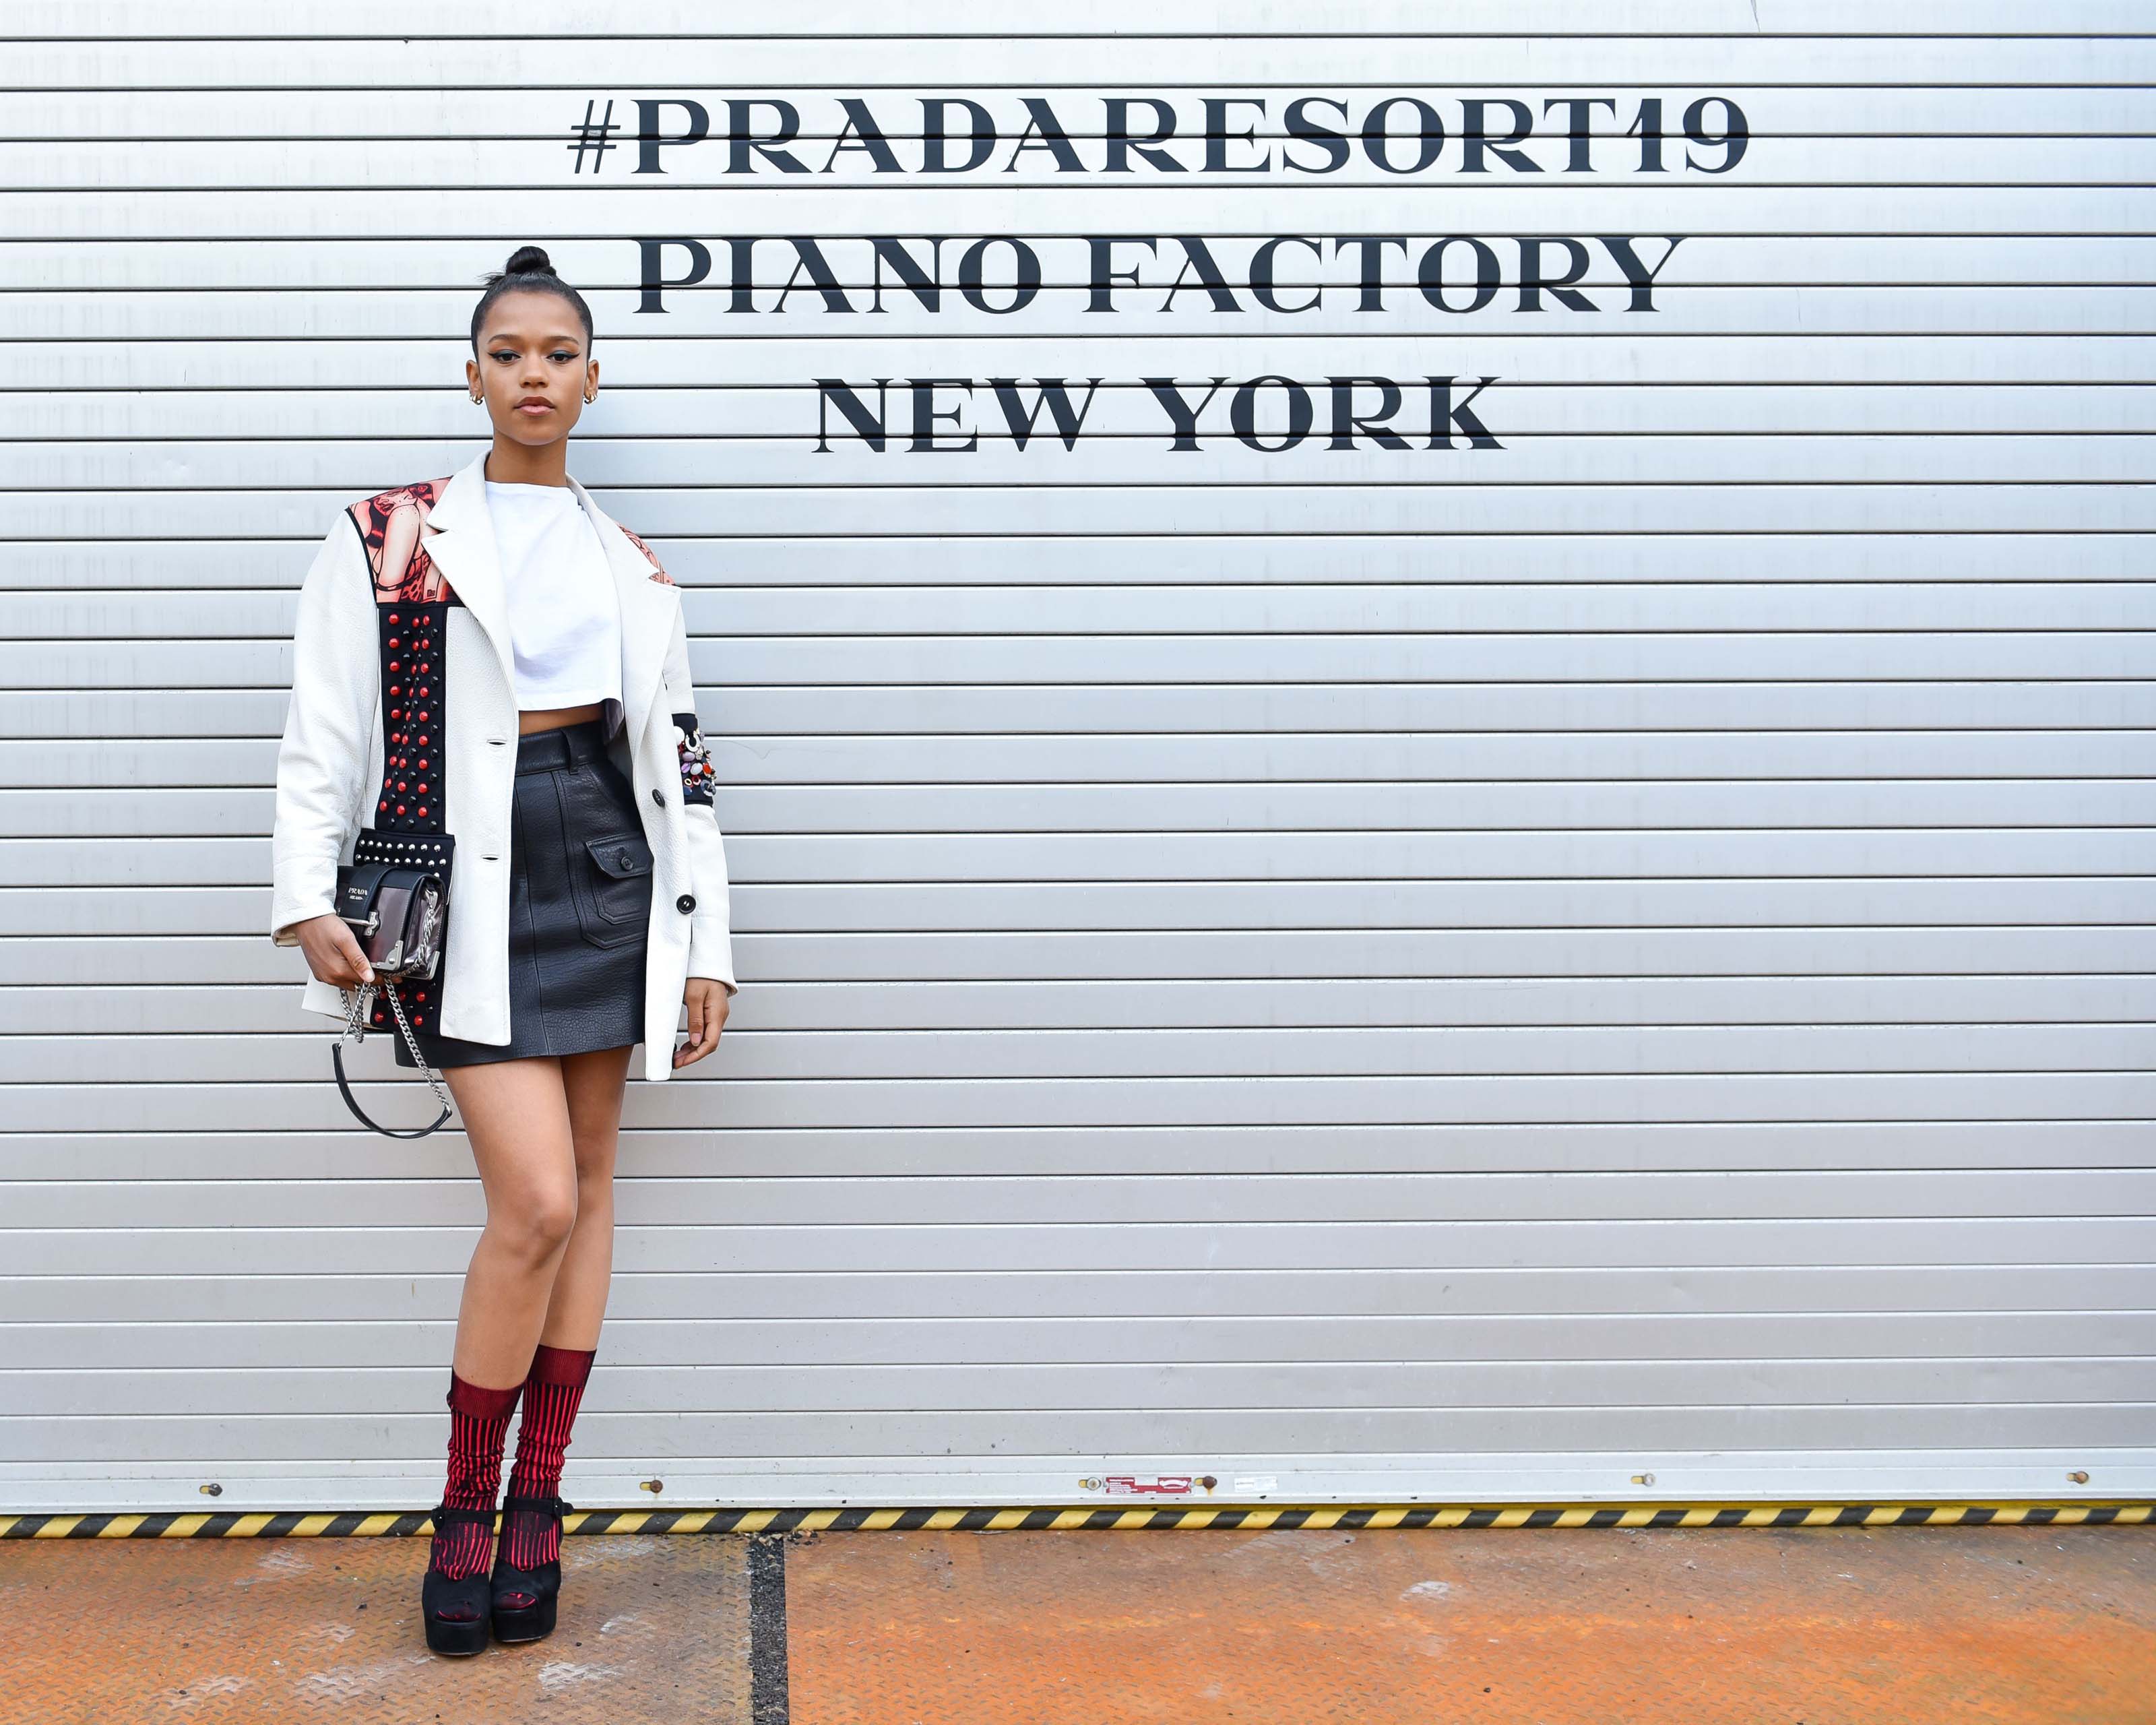 Taylor Russell attends Prada Resort Collection 2019